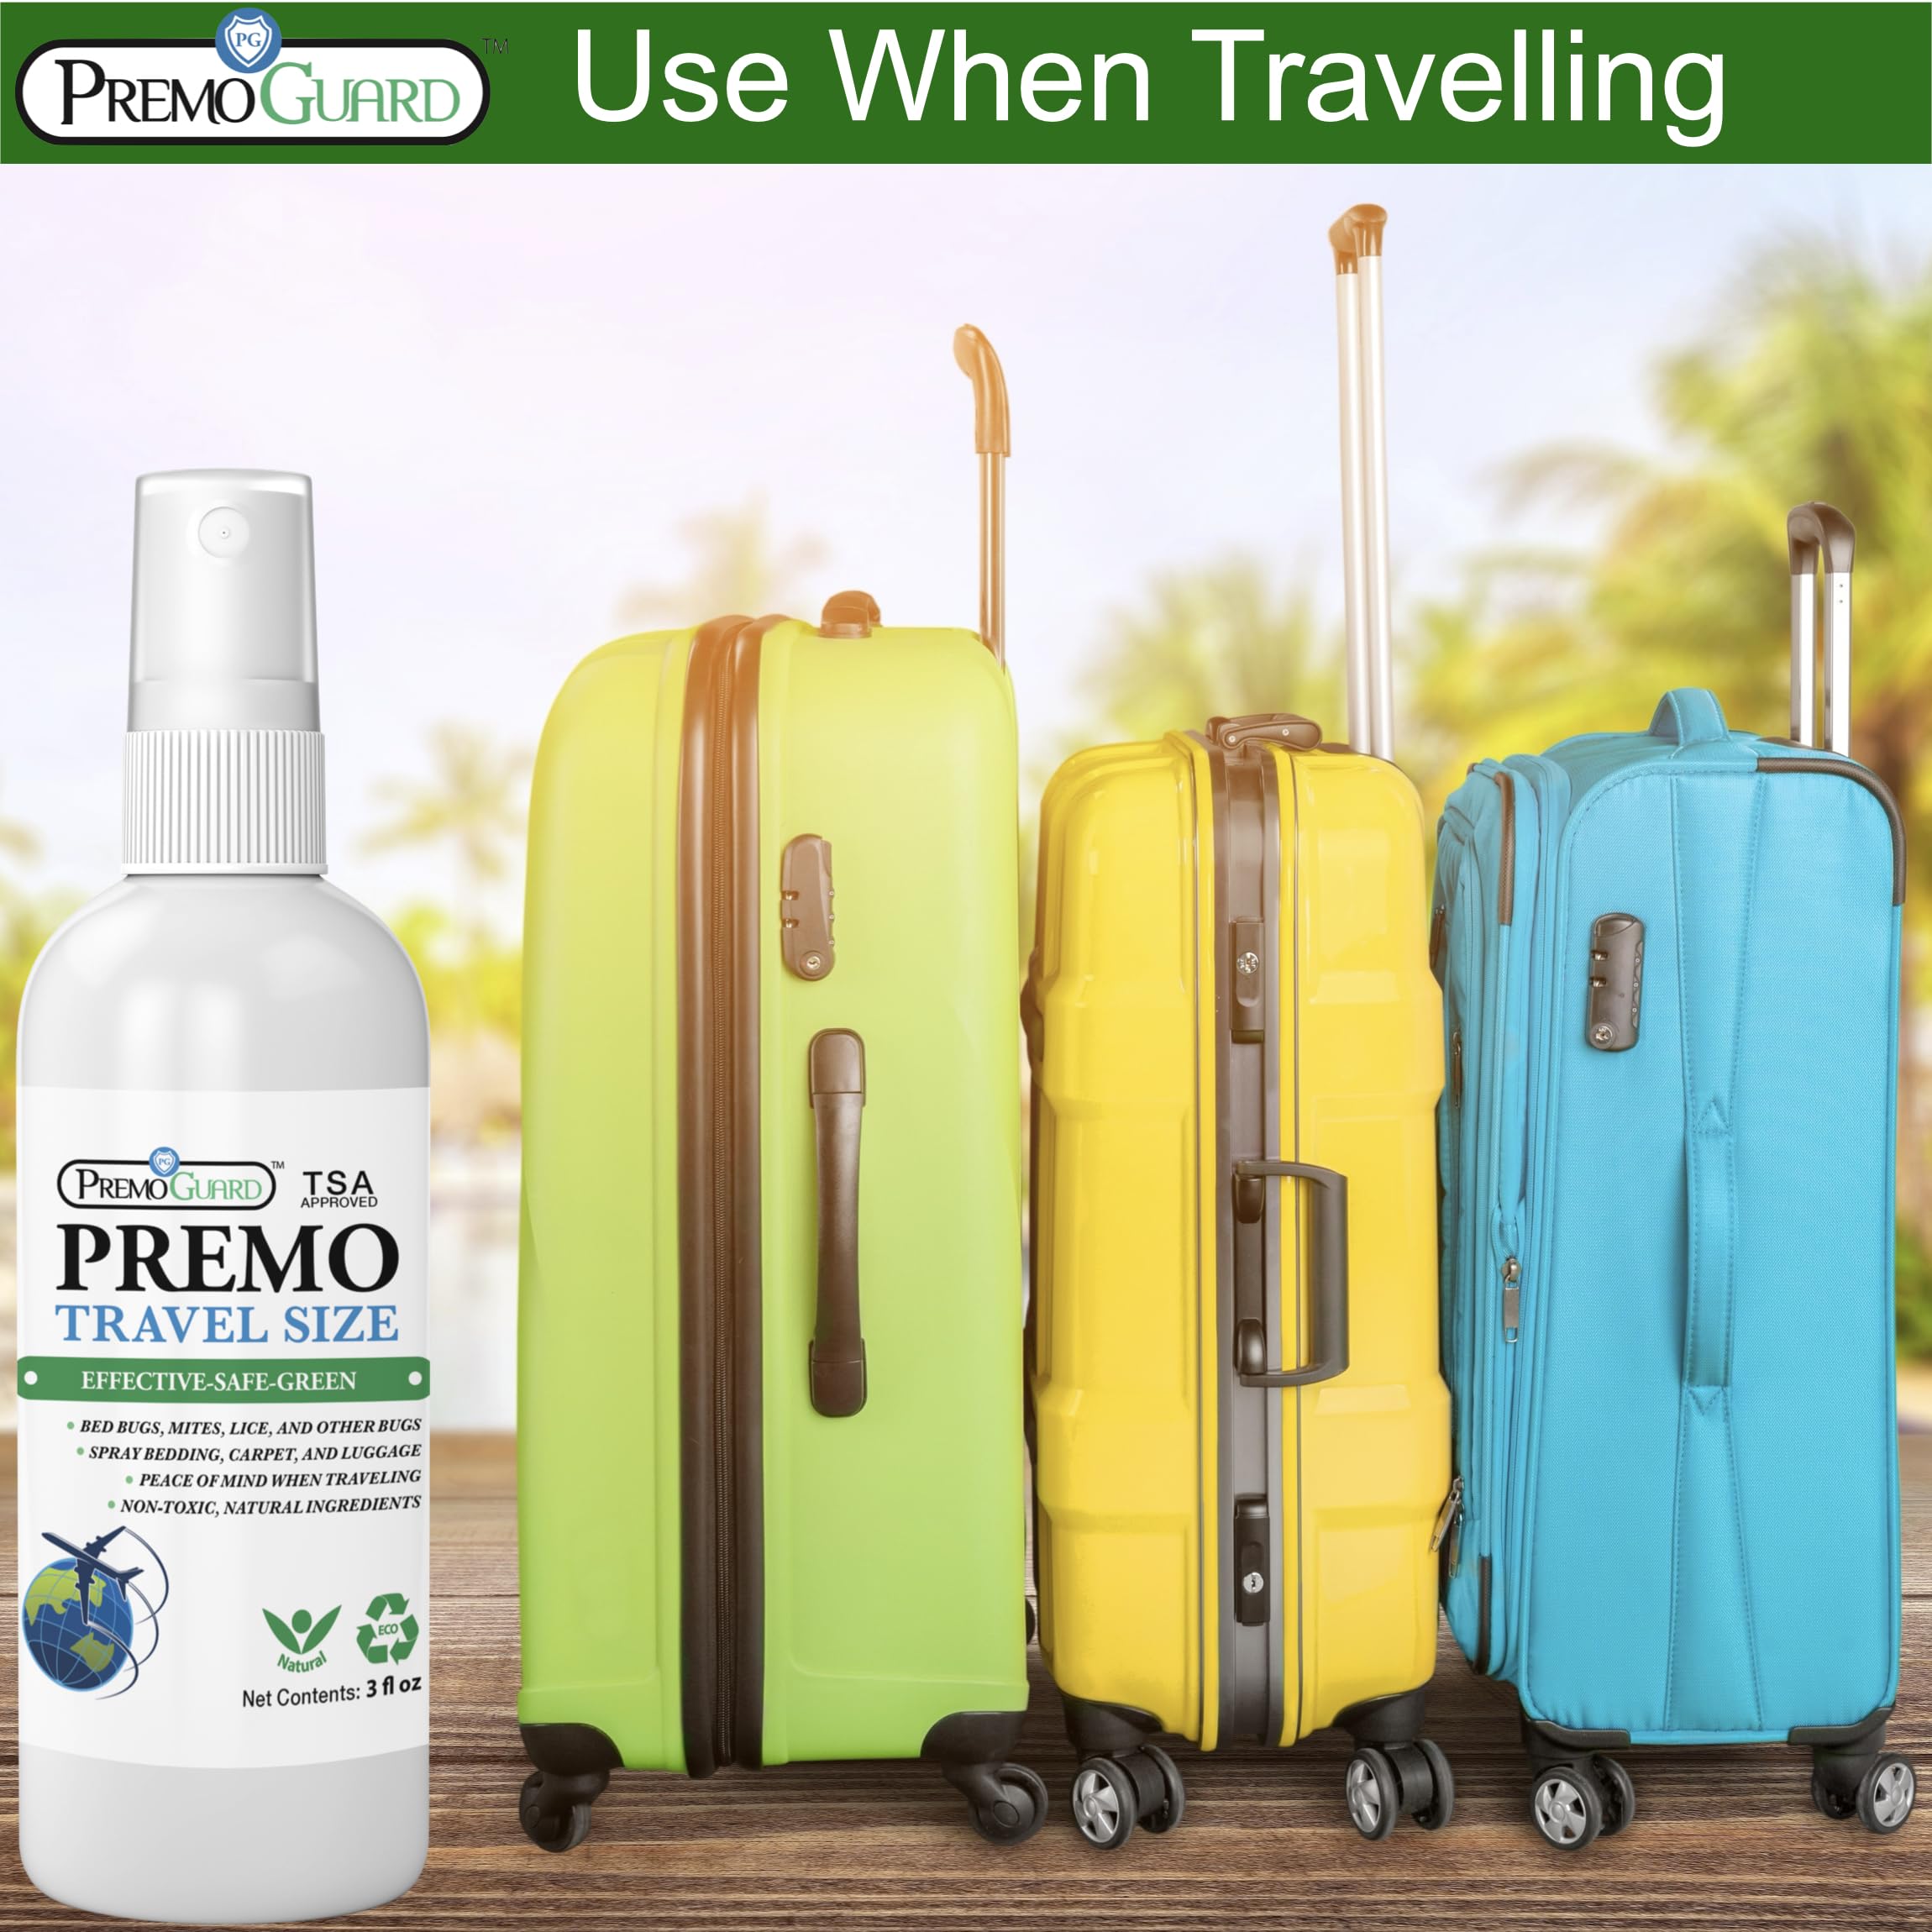 Travel Size Bed Bug Sprays by Premo Guard - 3 oz (3 Pack)